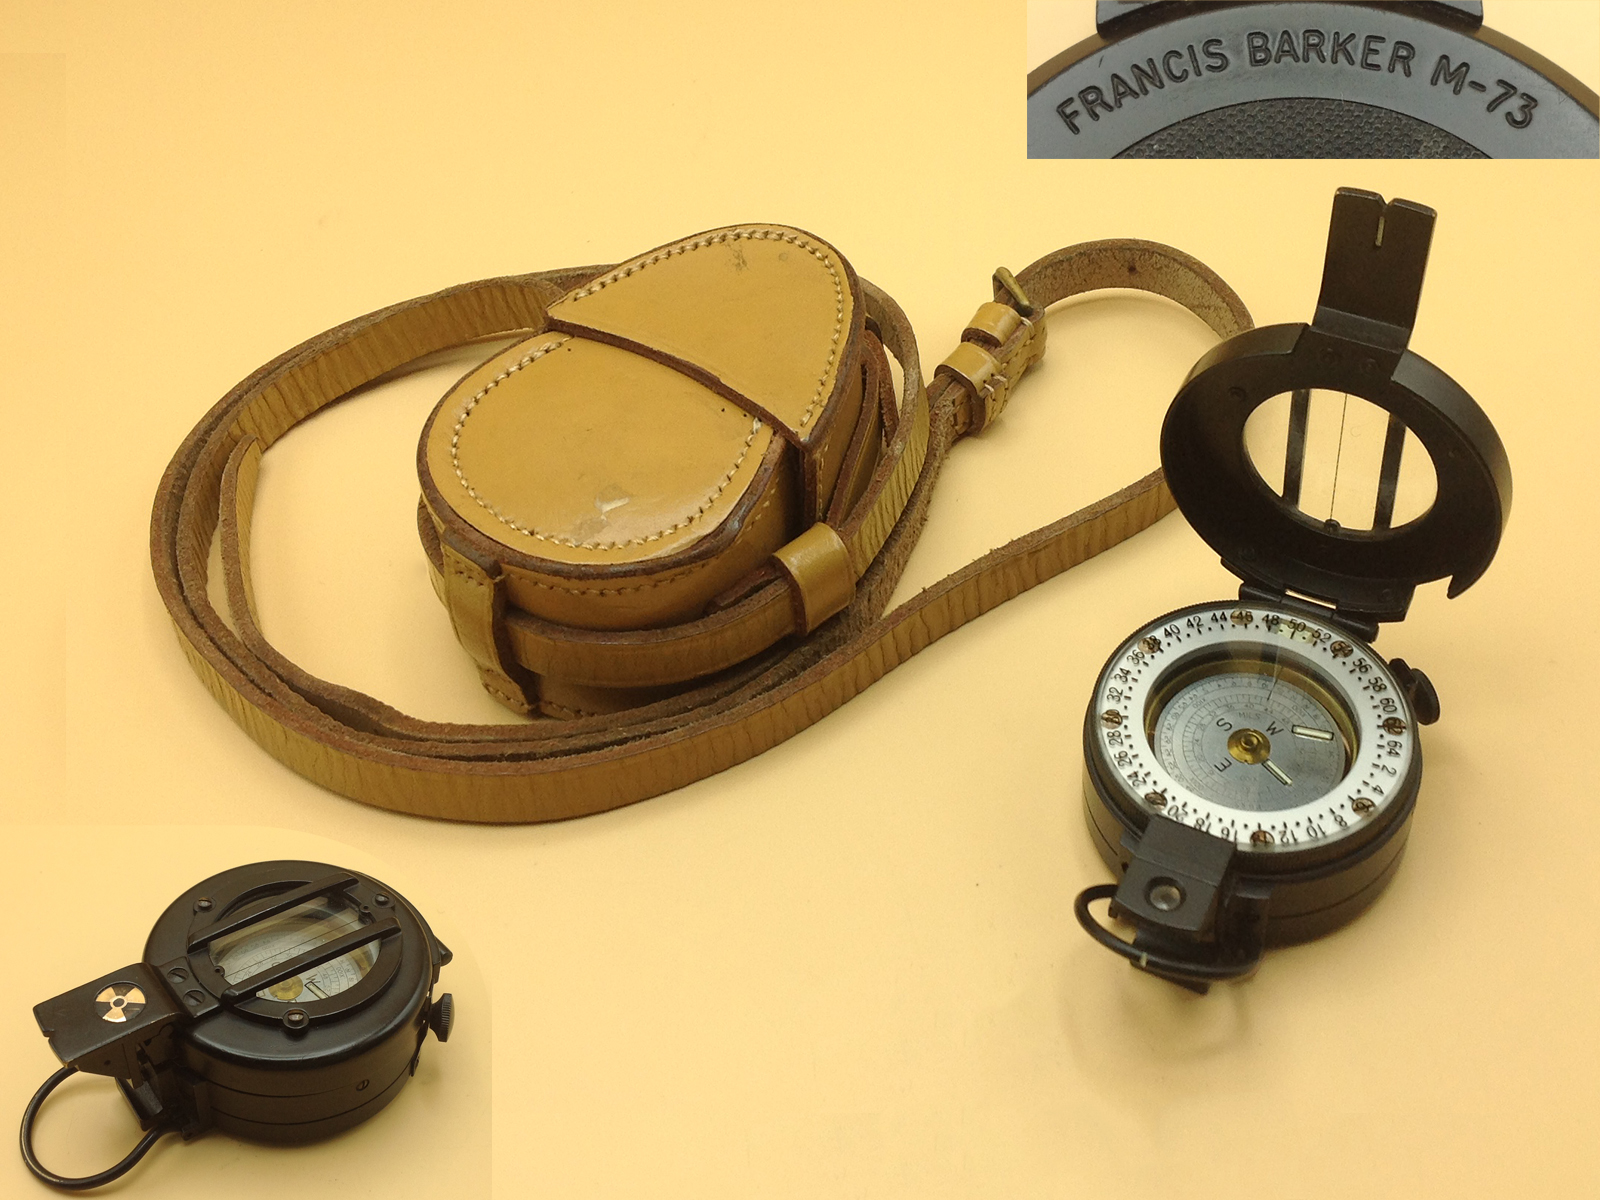 Francis Barker M-73 military prismatic compass